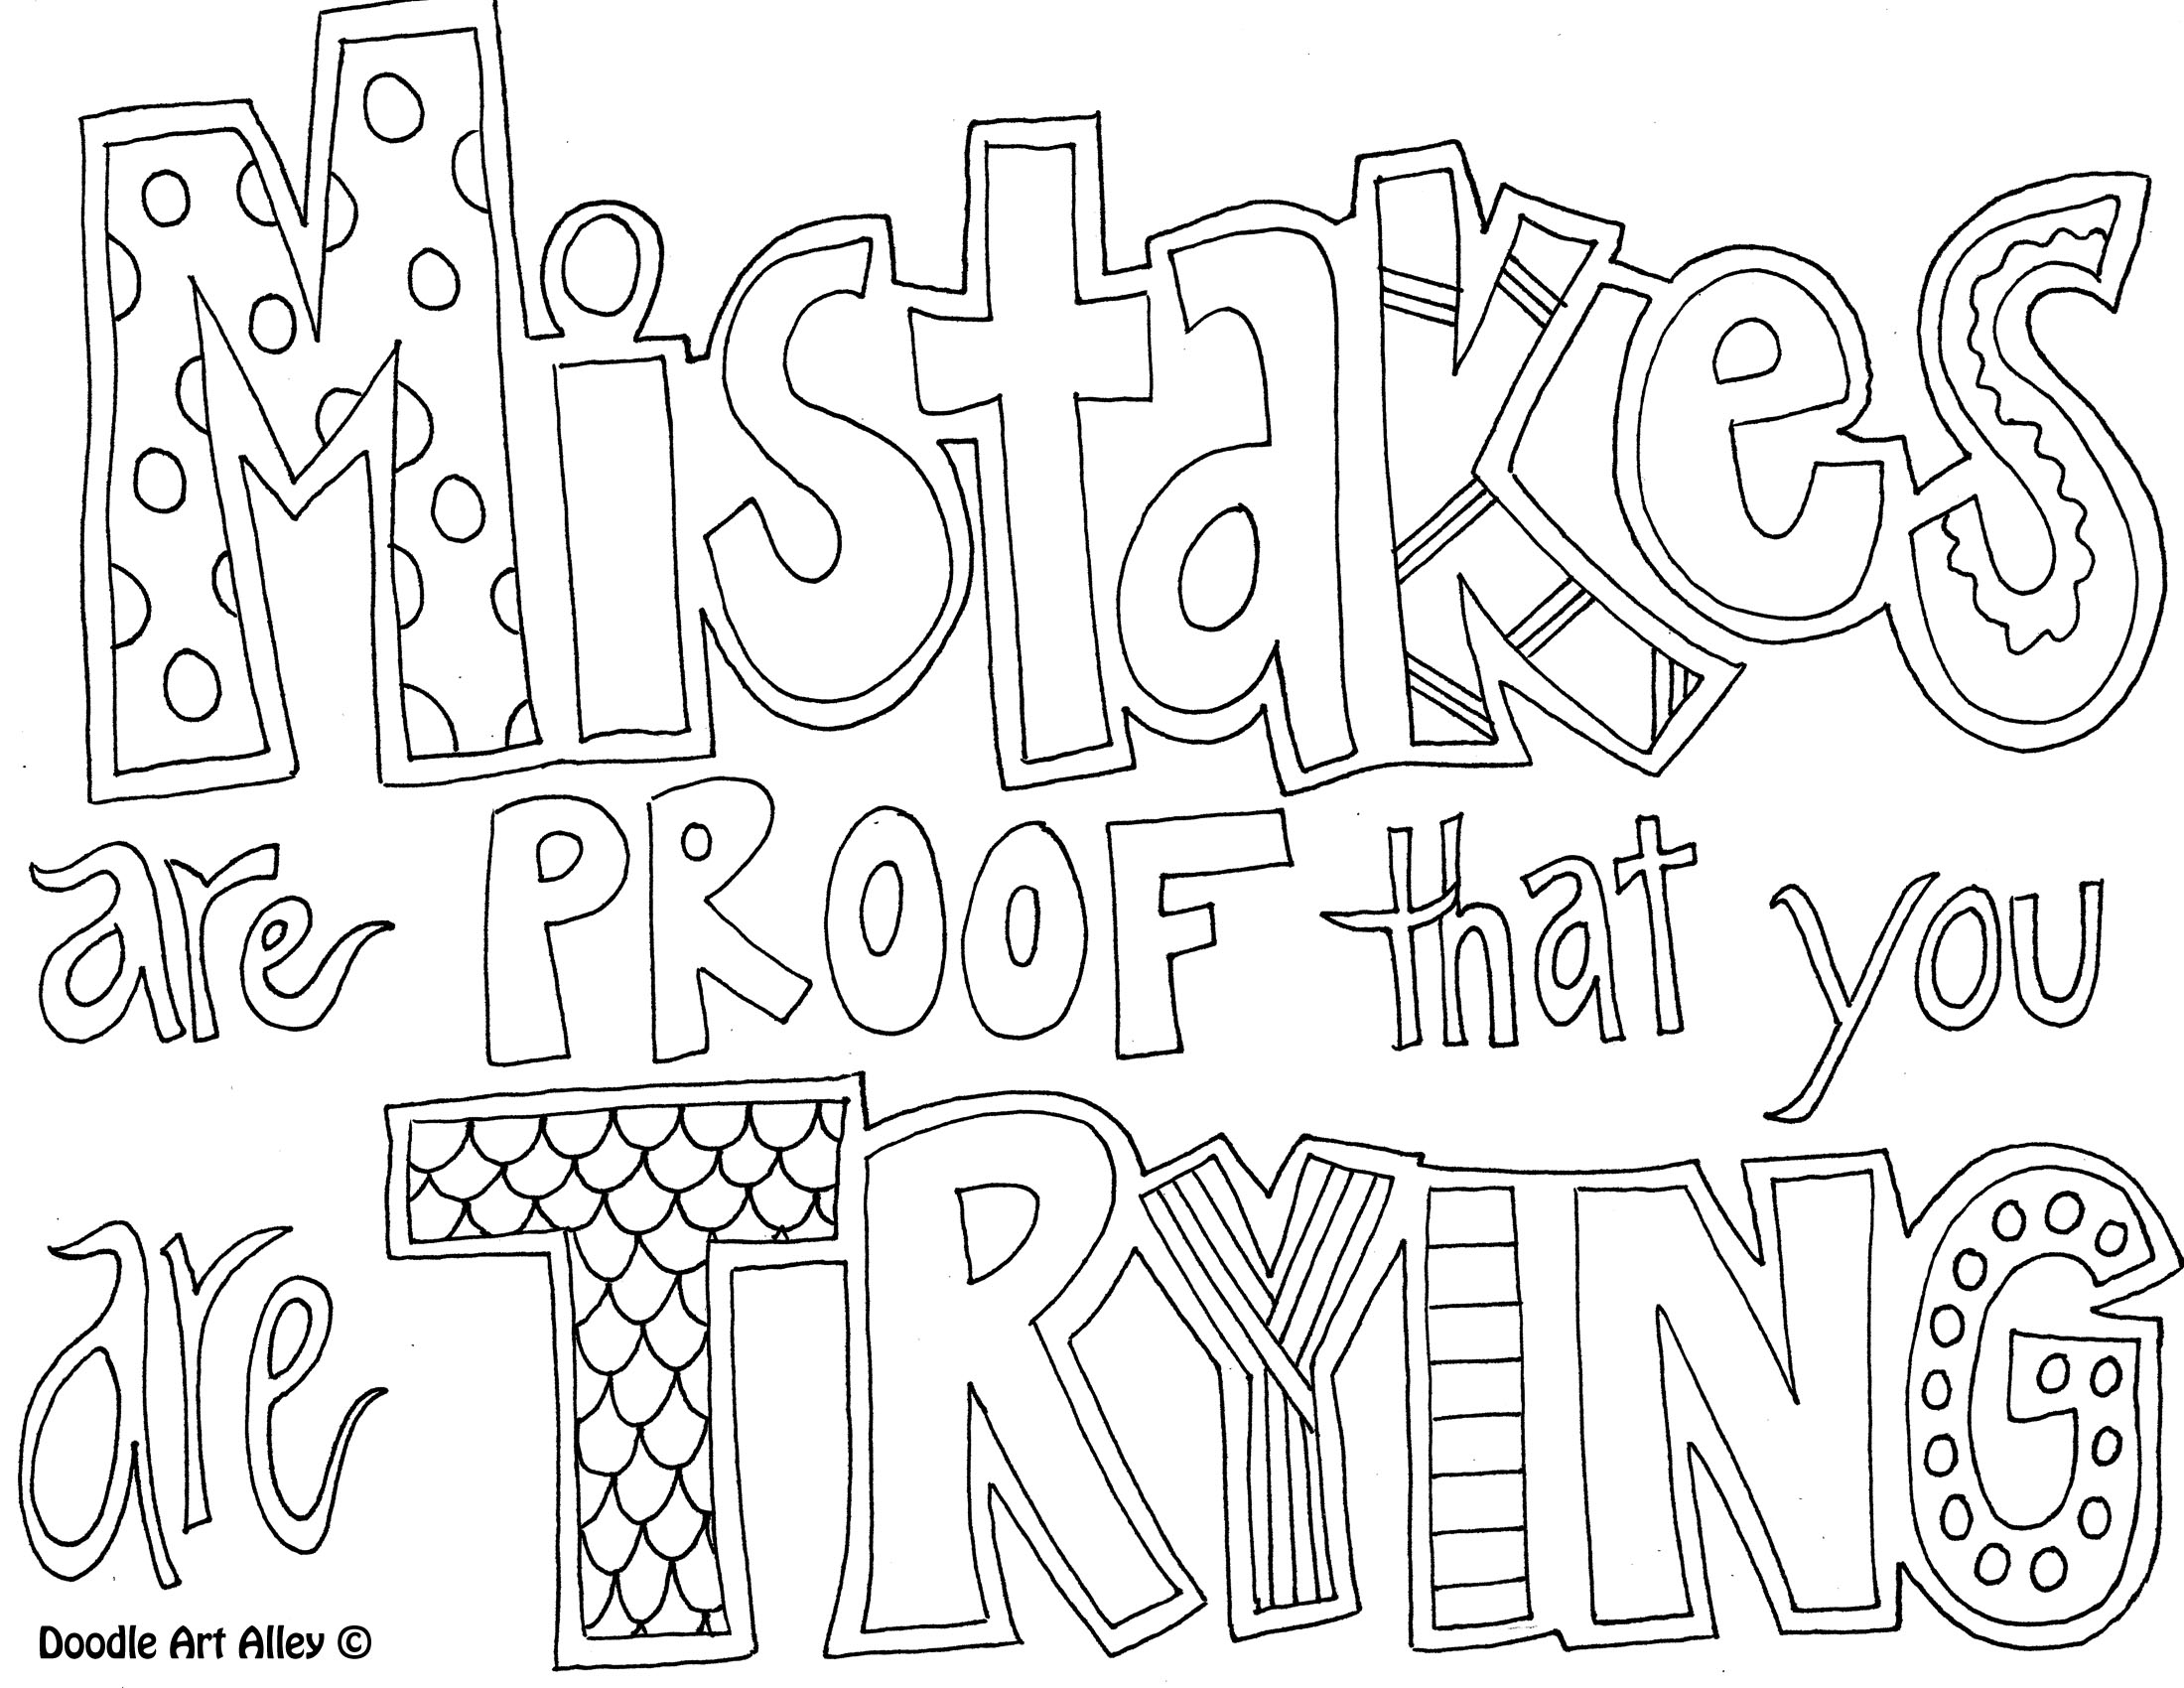 Doodle Quotes Coloring Pages Image